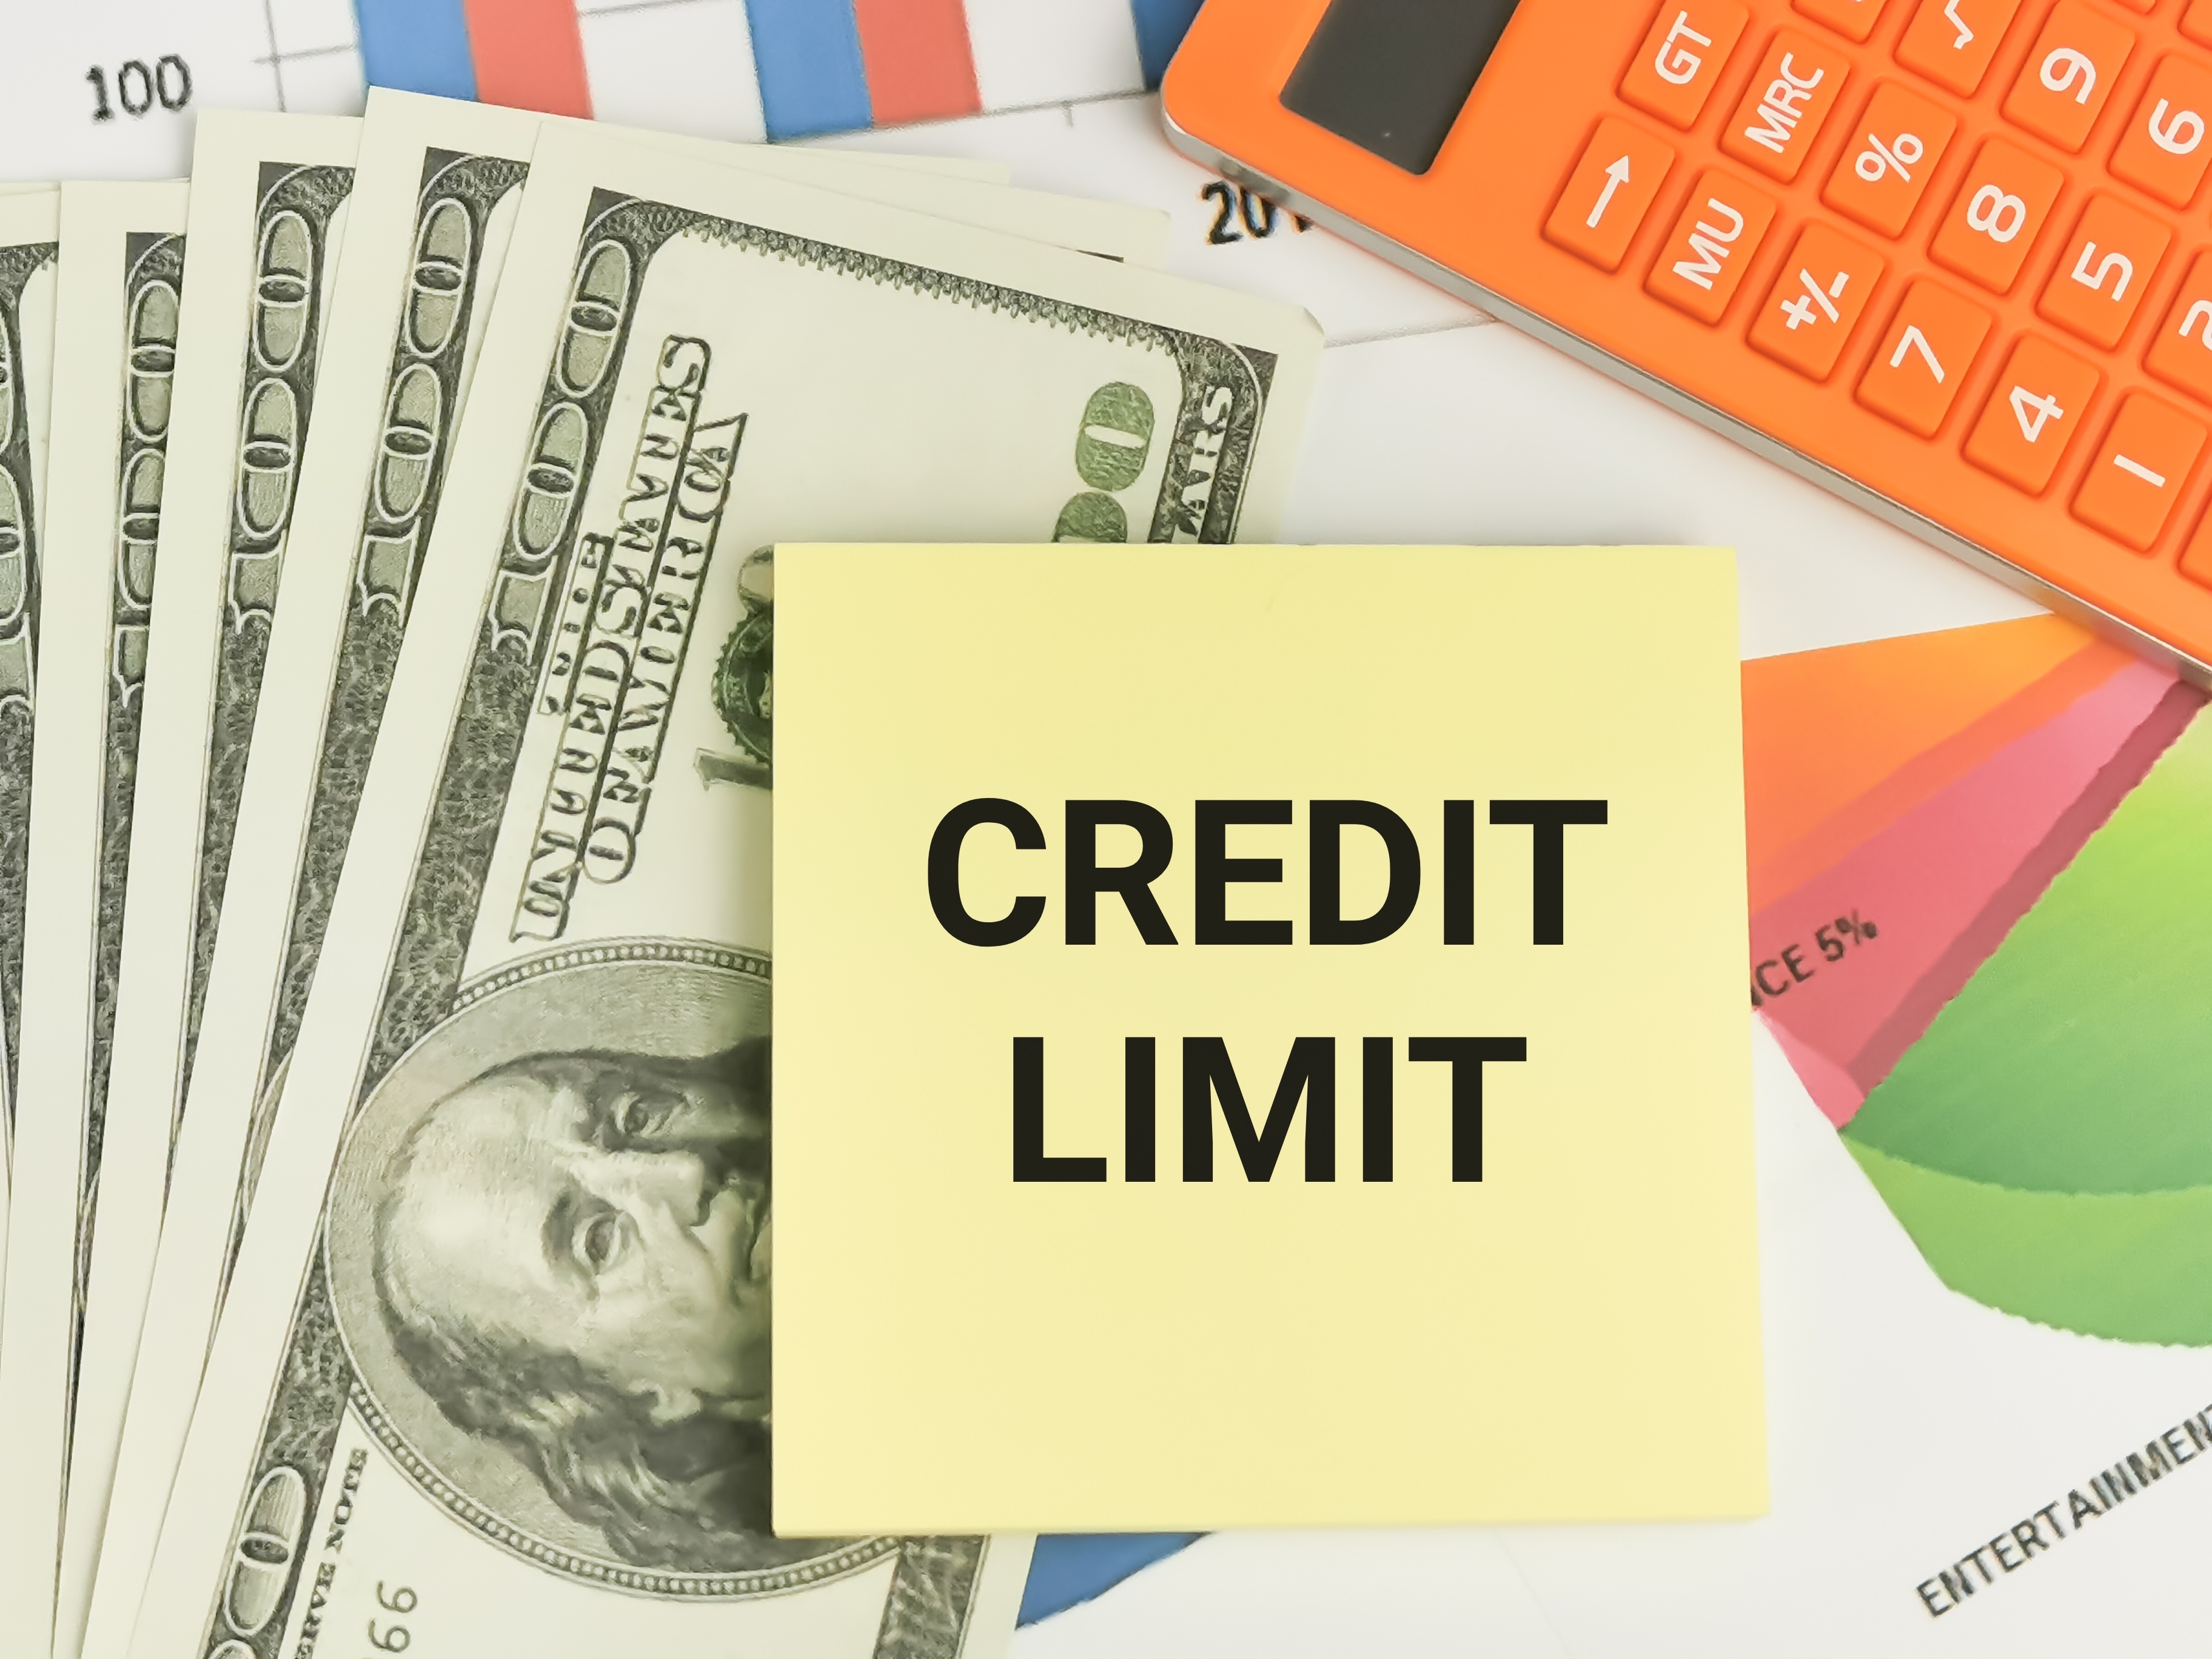 Learn how to increase your credit limit with a Secured card! Source: Adobe Stock.